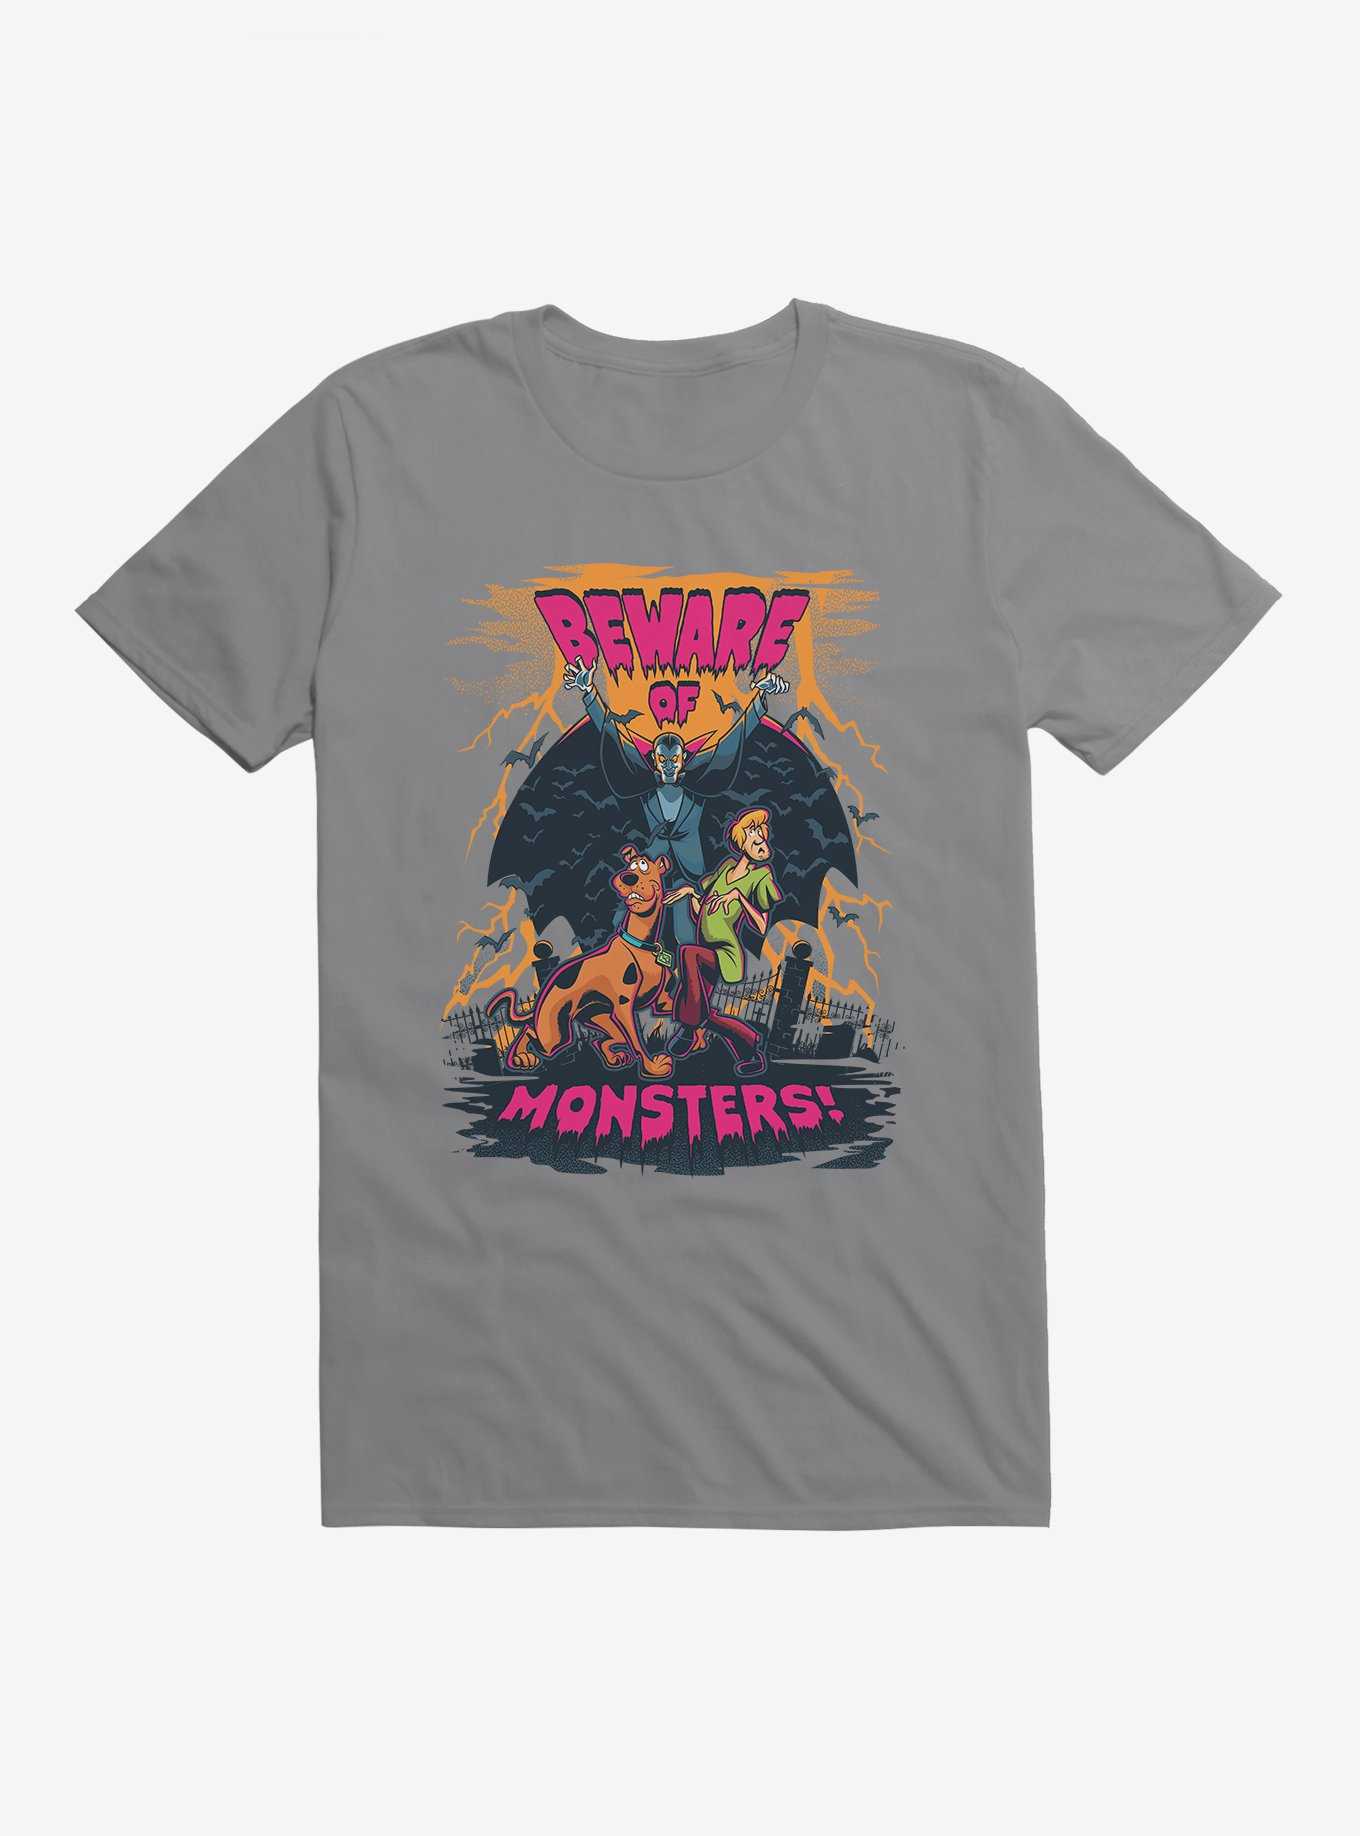 Scooby-Doo Beware Of Vampire Monsters! Shaggy And Scooby T-Shirt, , hi-res